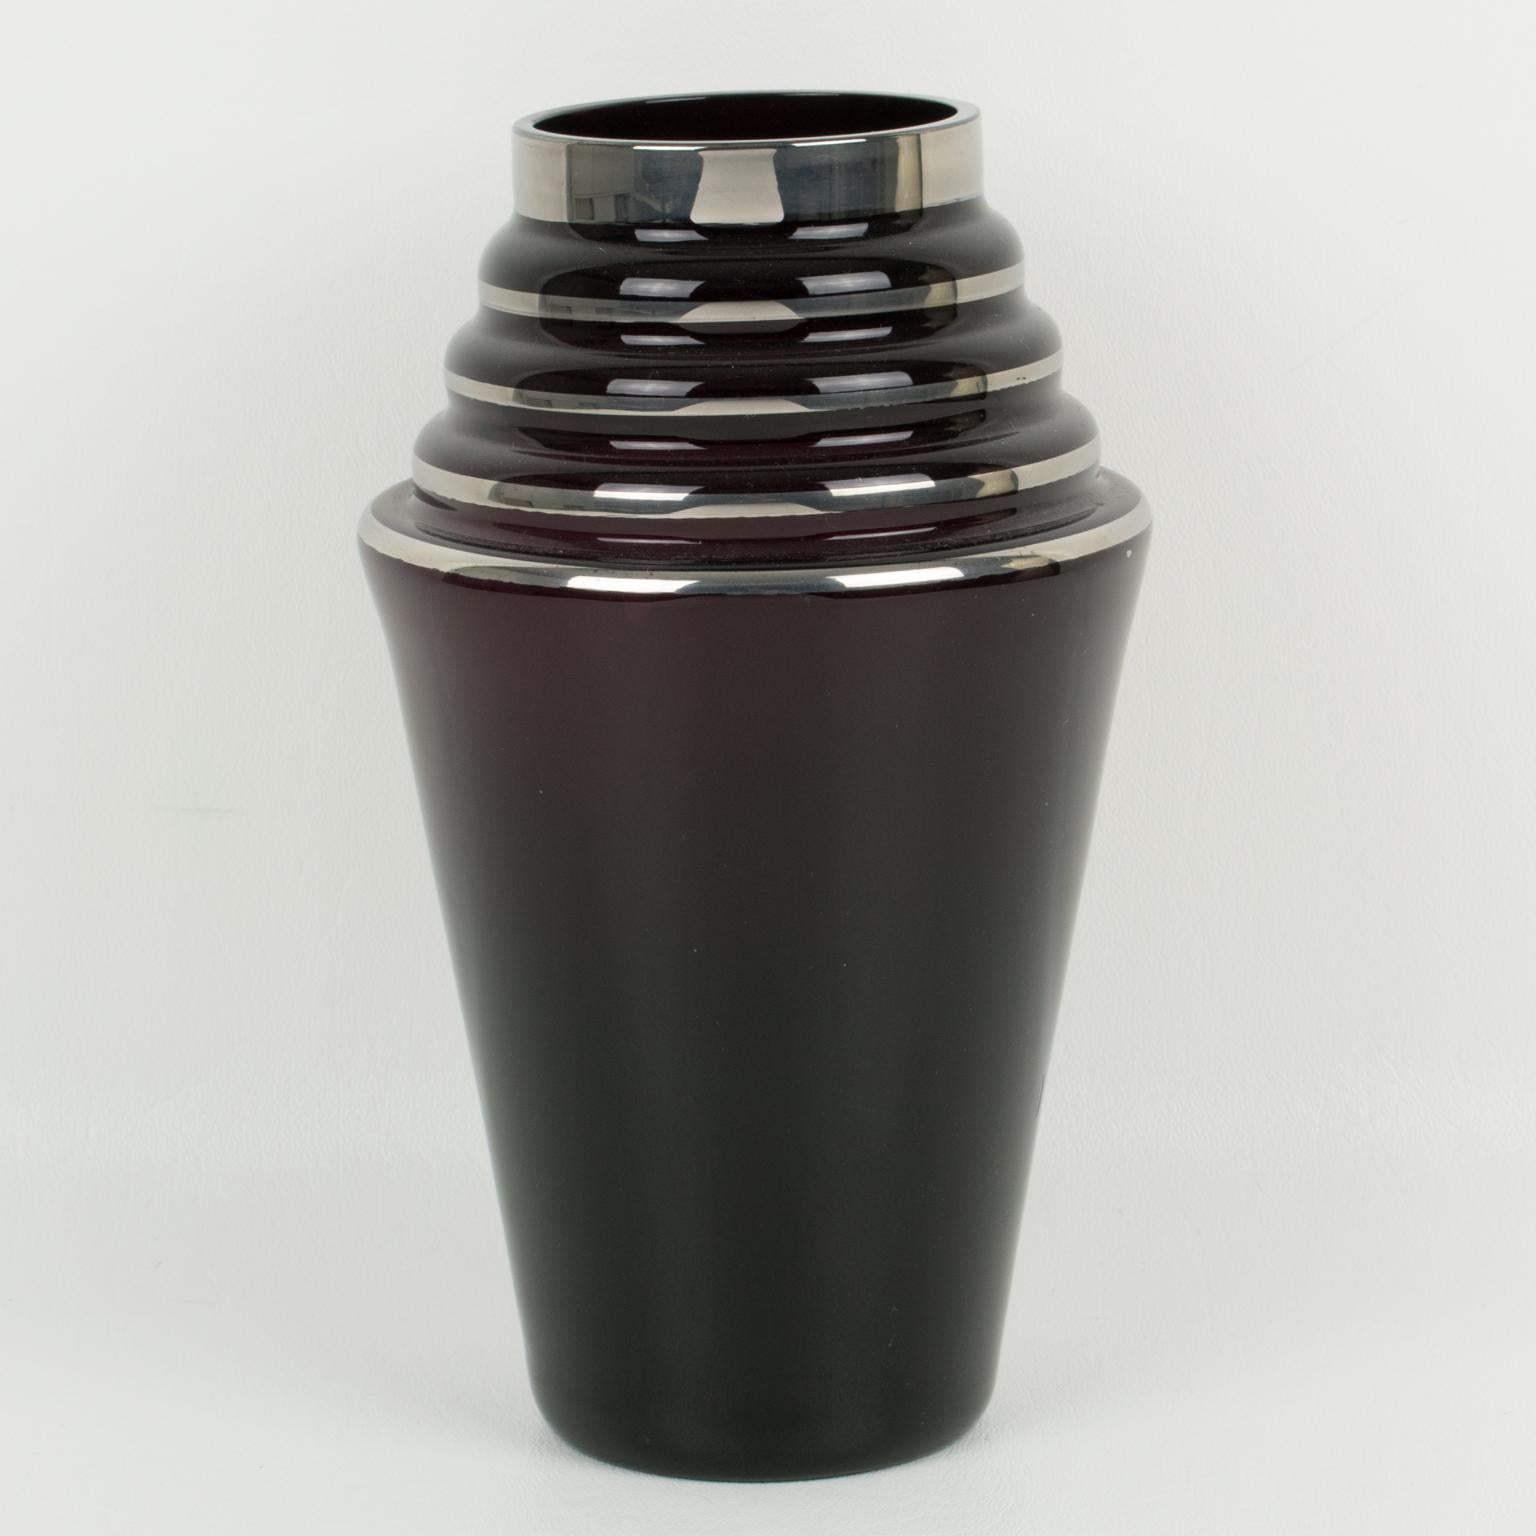 This lovely 1930s French Art Deco black glass vase features a silver deposit decoration all around with geometric patterns. Please note that although usually named 